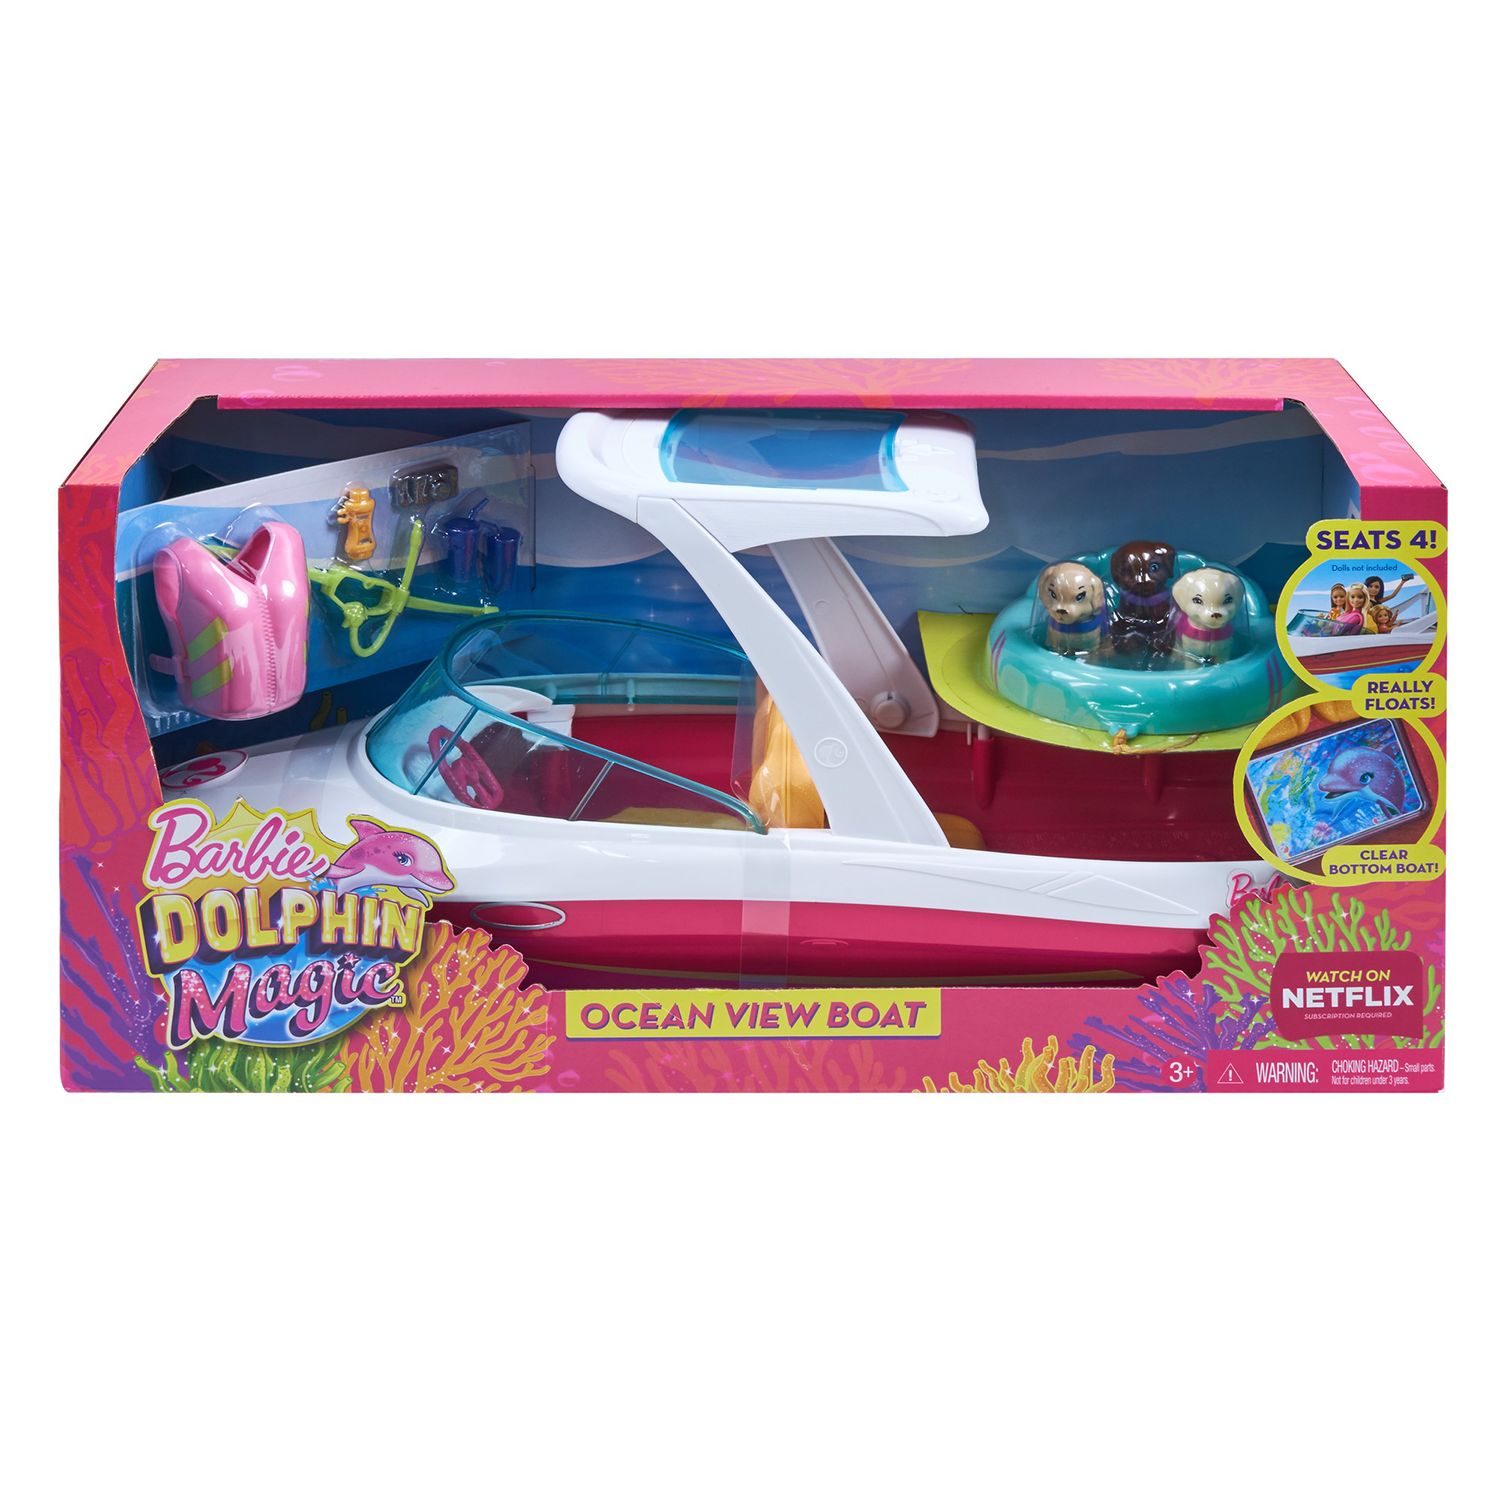 barbie dolphin boat